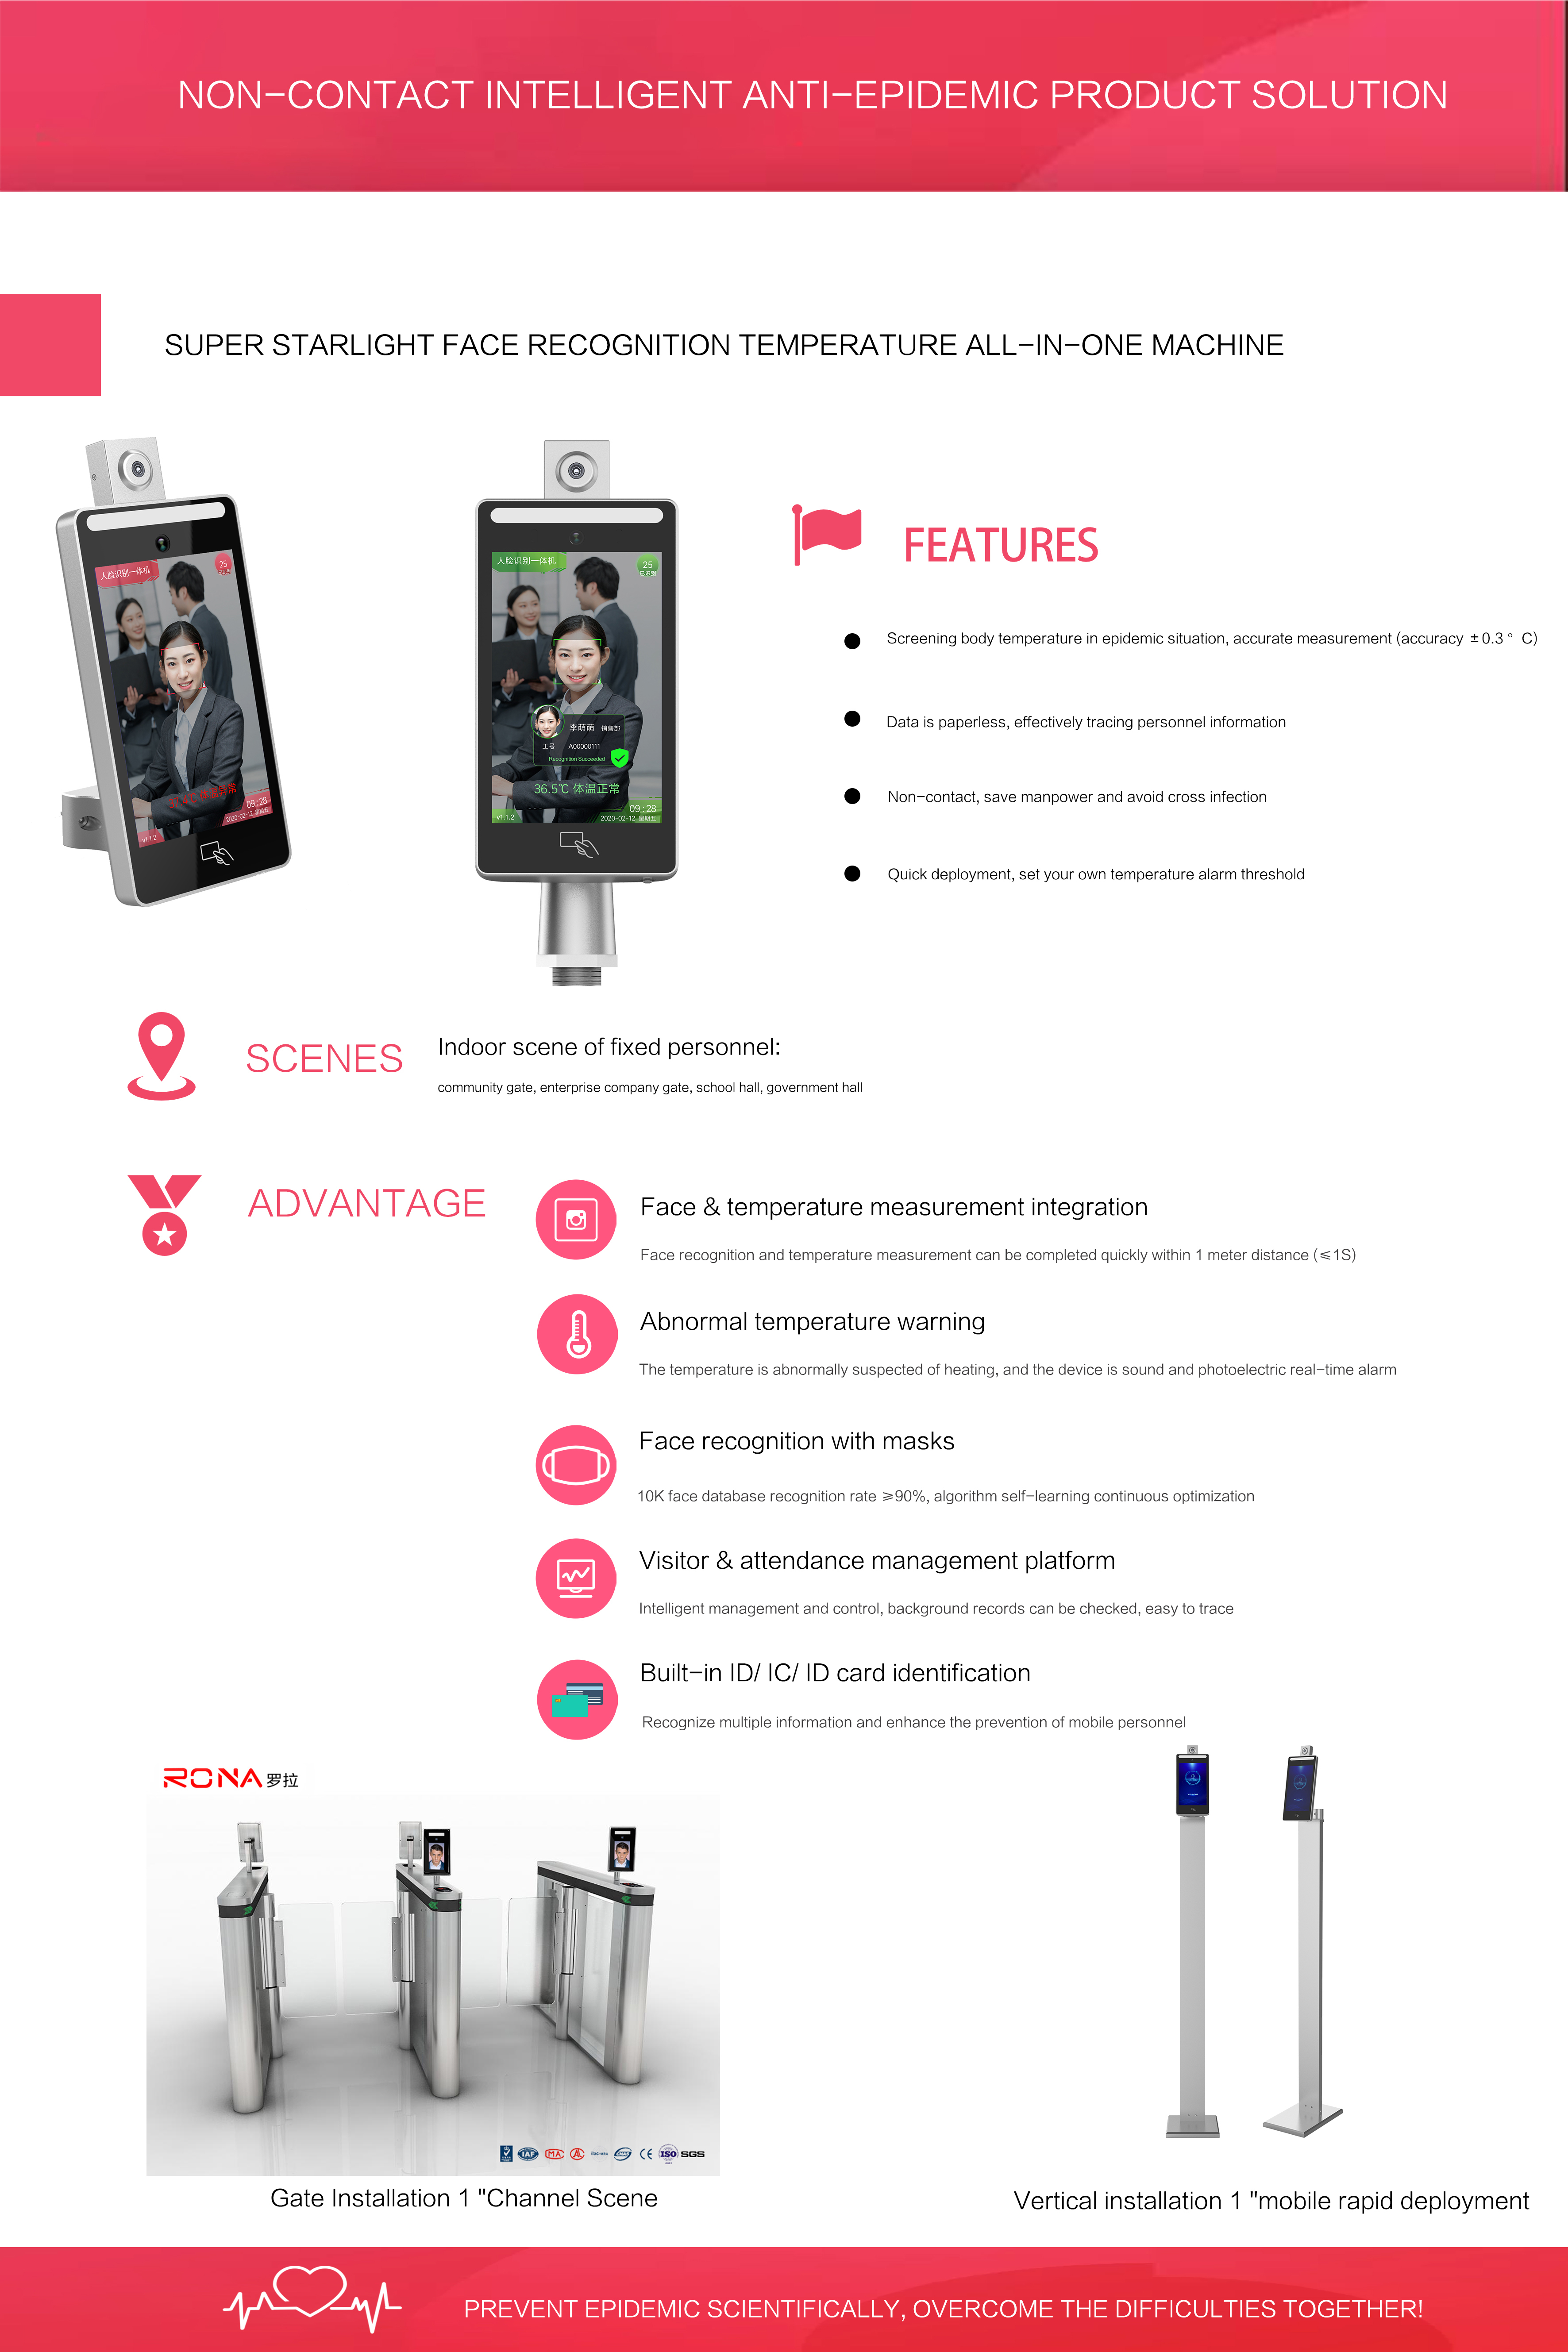 All In One Face Recognition Thermometer Temperature Scanning Waterproof Dual Camera